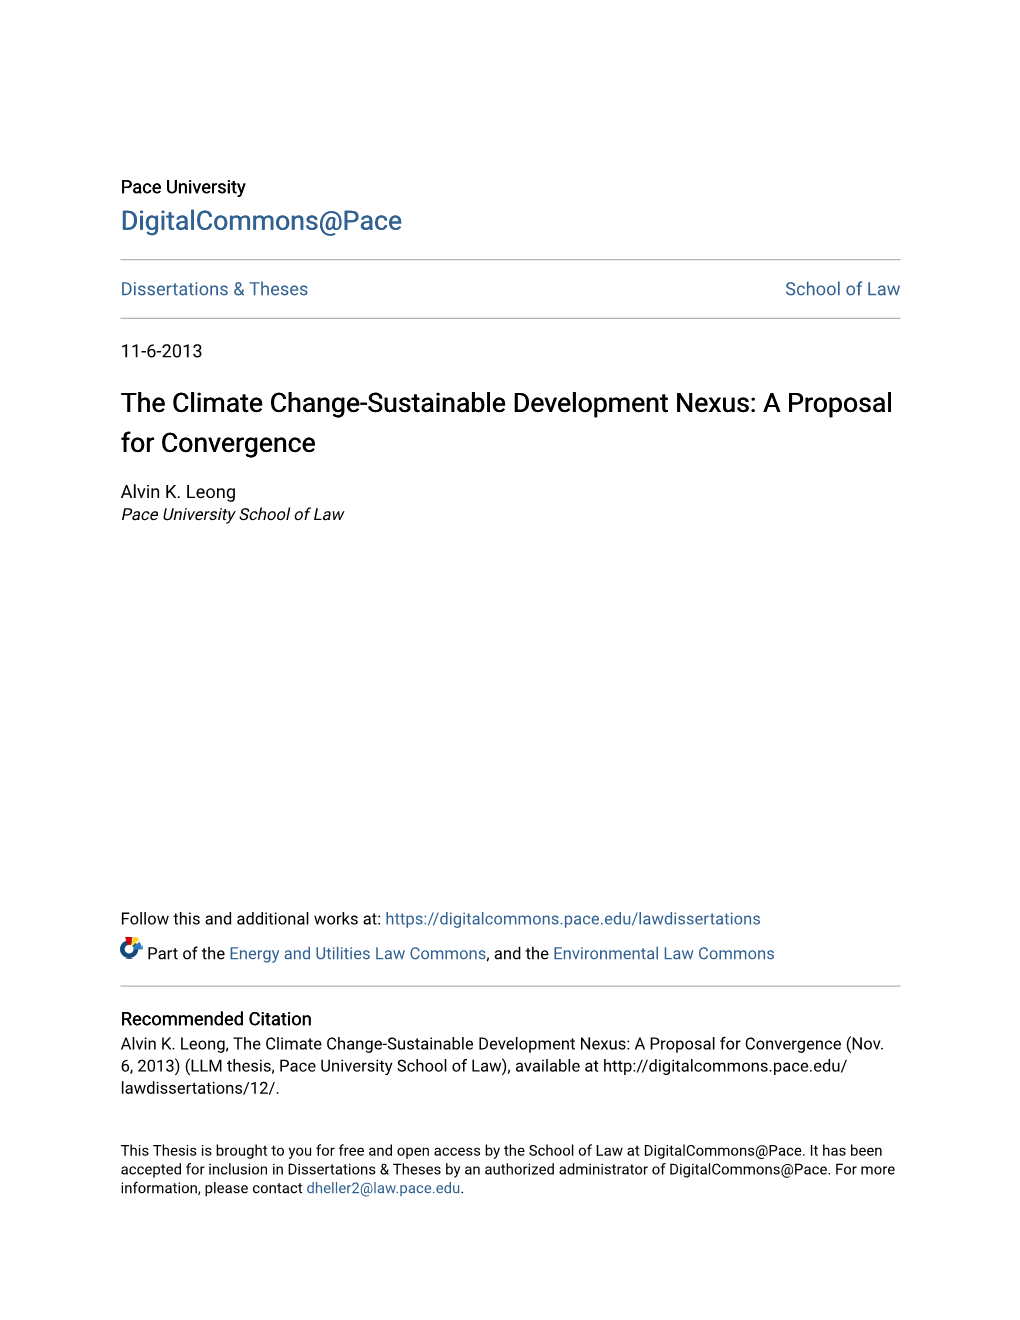 The Climate Change-Sustainable Development Nexus: a Proposal for Convergence